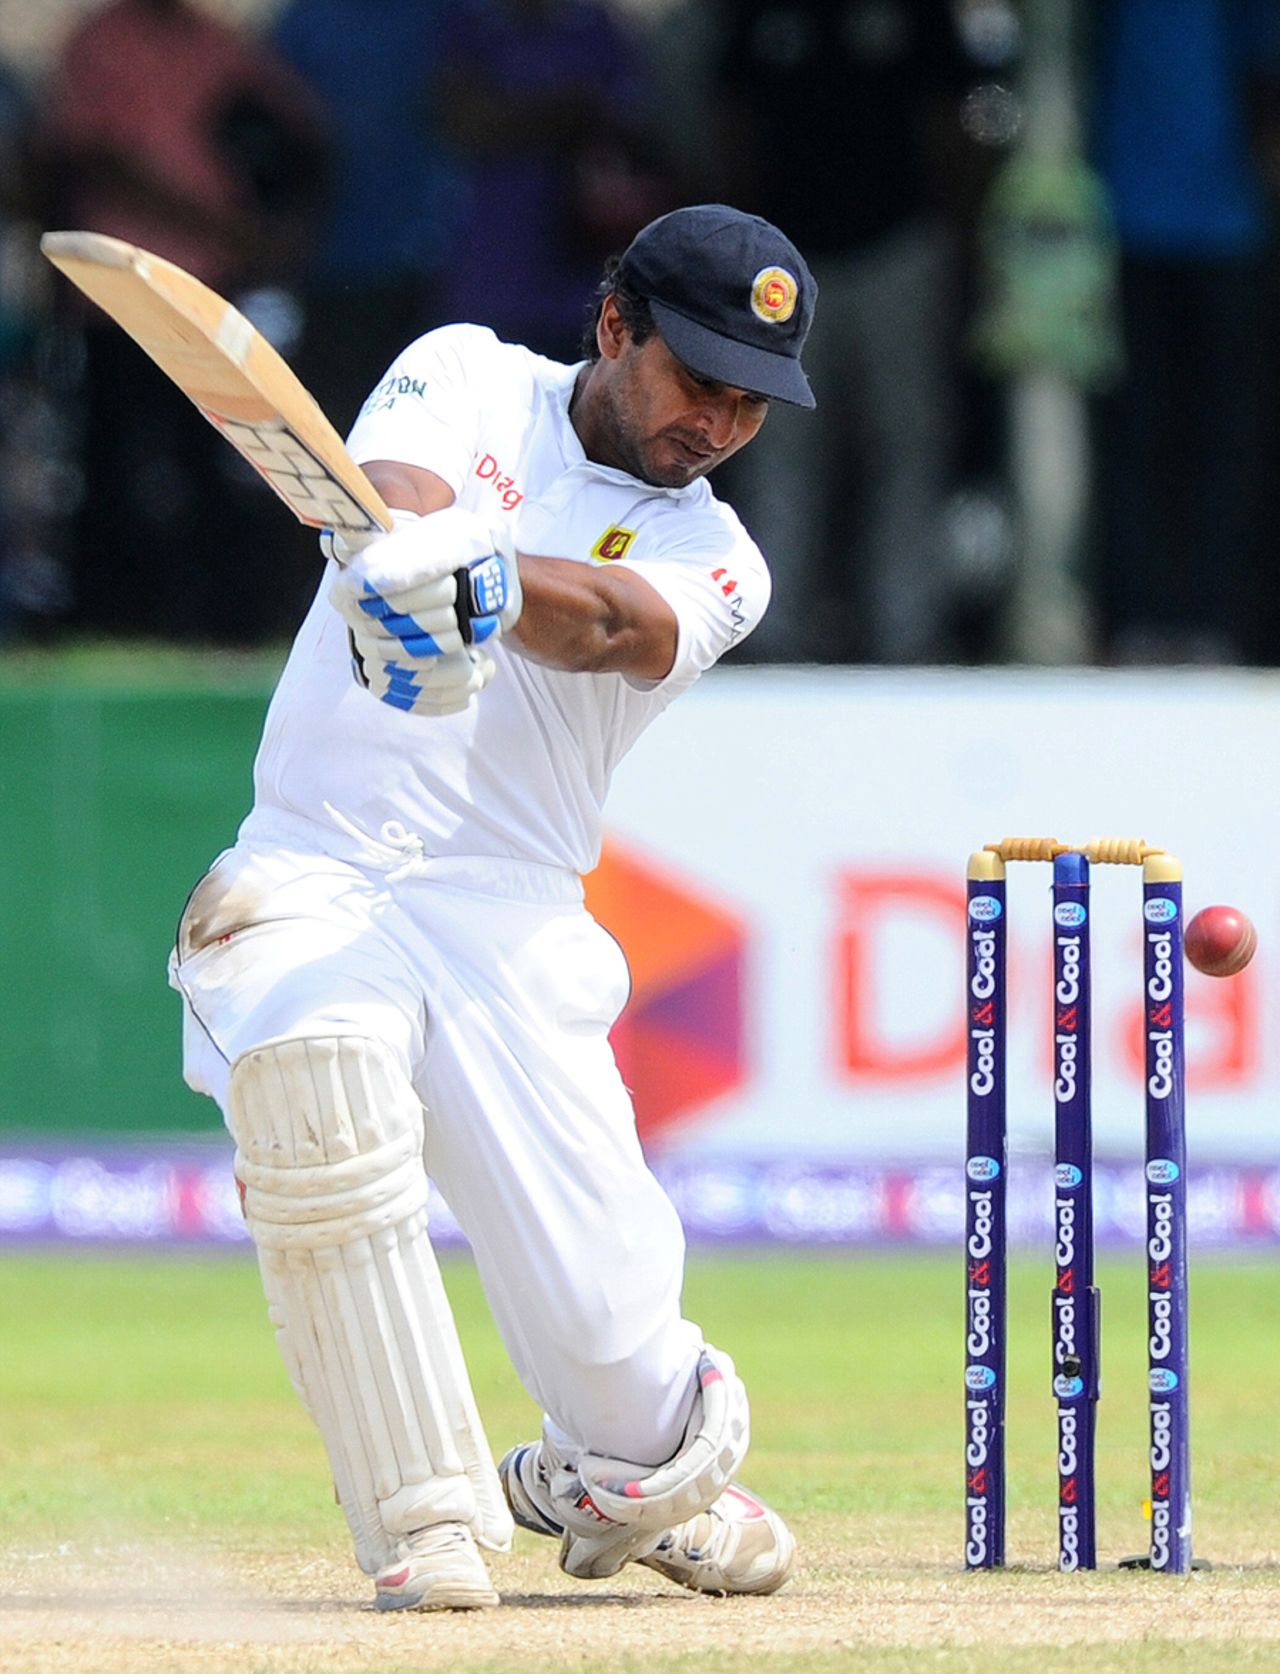 Kumar Sangakkara hits out on his way to a hundred, Sri Lanka v Pakistan, 1st Test, Galle, 3rd day, August 8, 2014